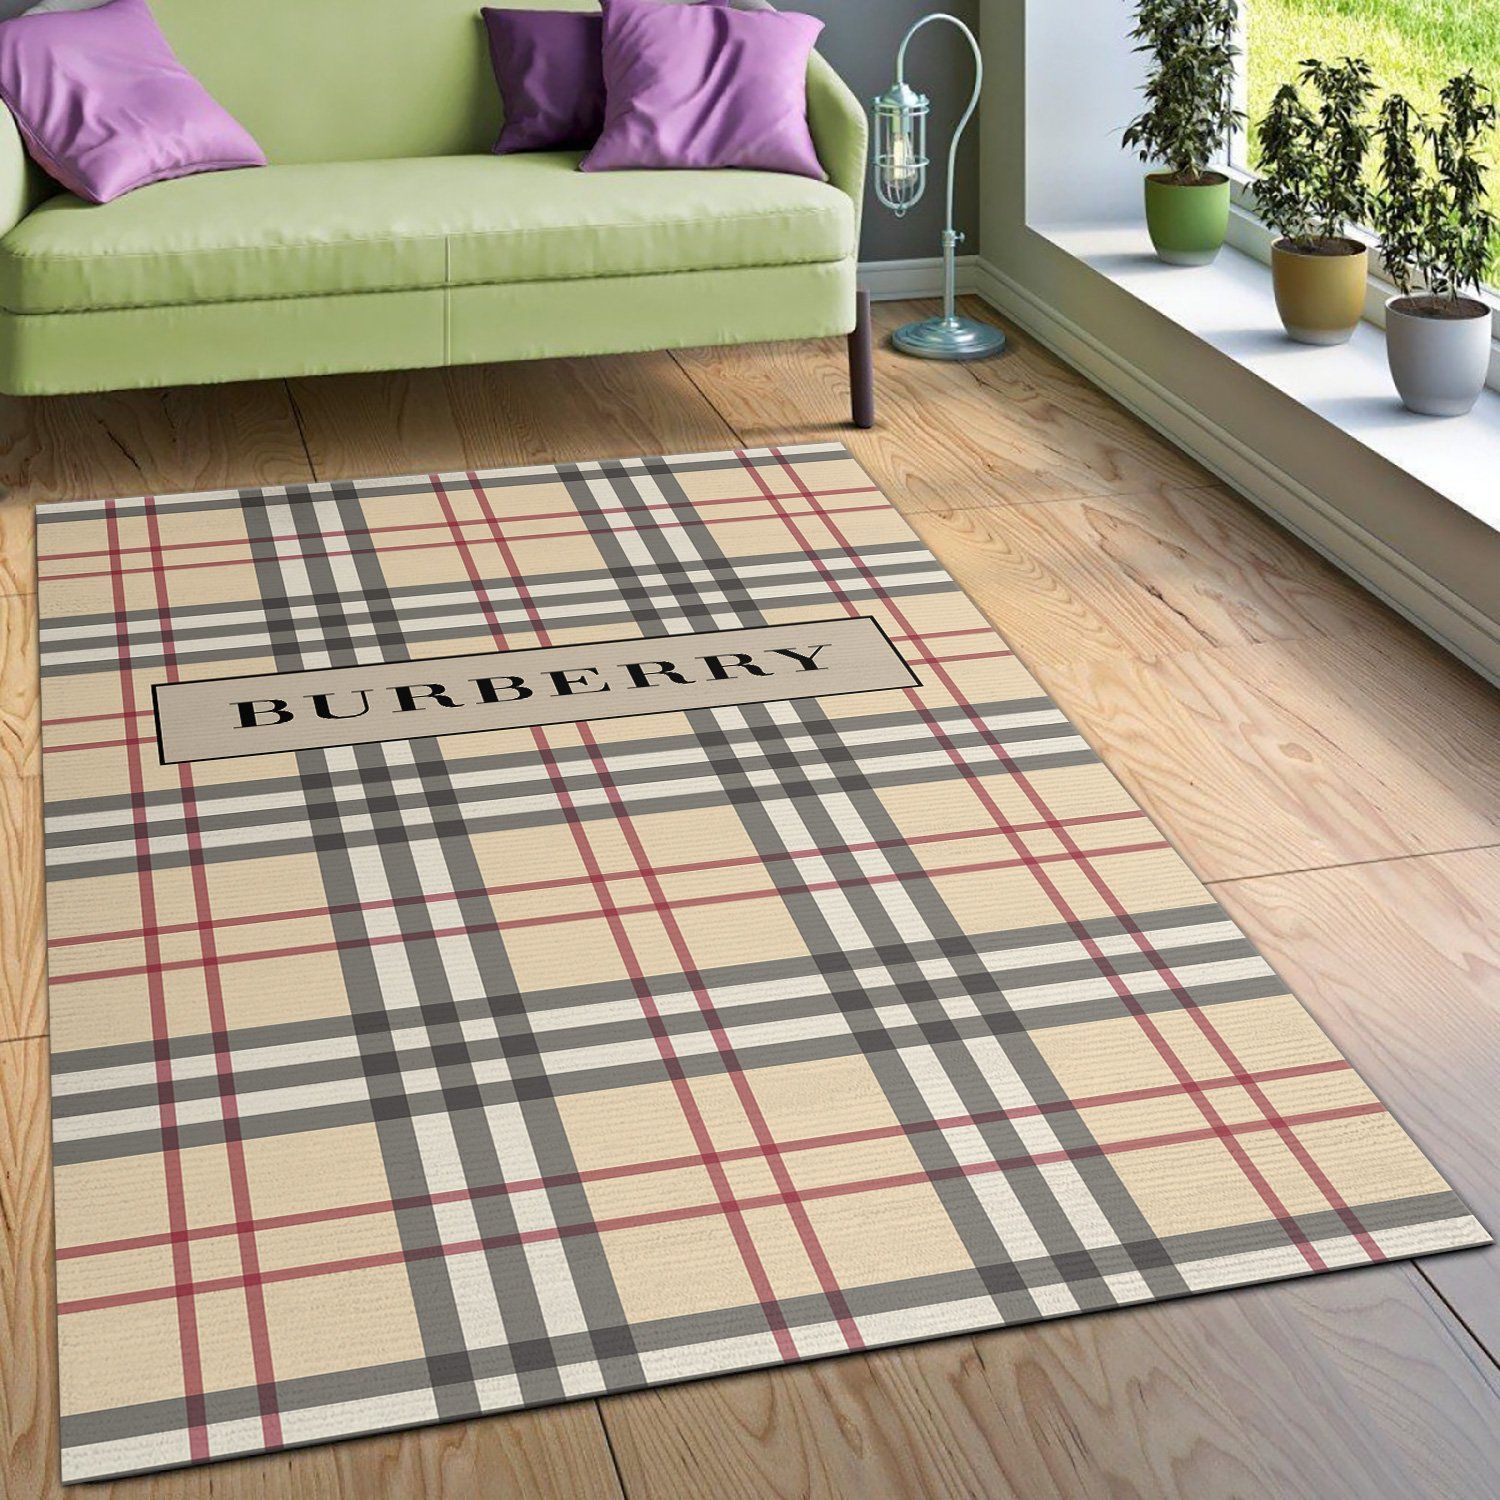 Burberry Logo Area Rugs Living Room Carpet FN241223 Brands Fashion Floor Decor The US Decor - Indoor Outdoor Rugs 3